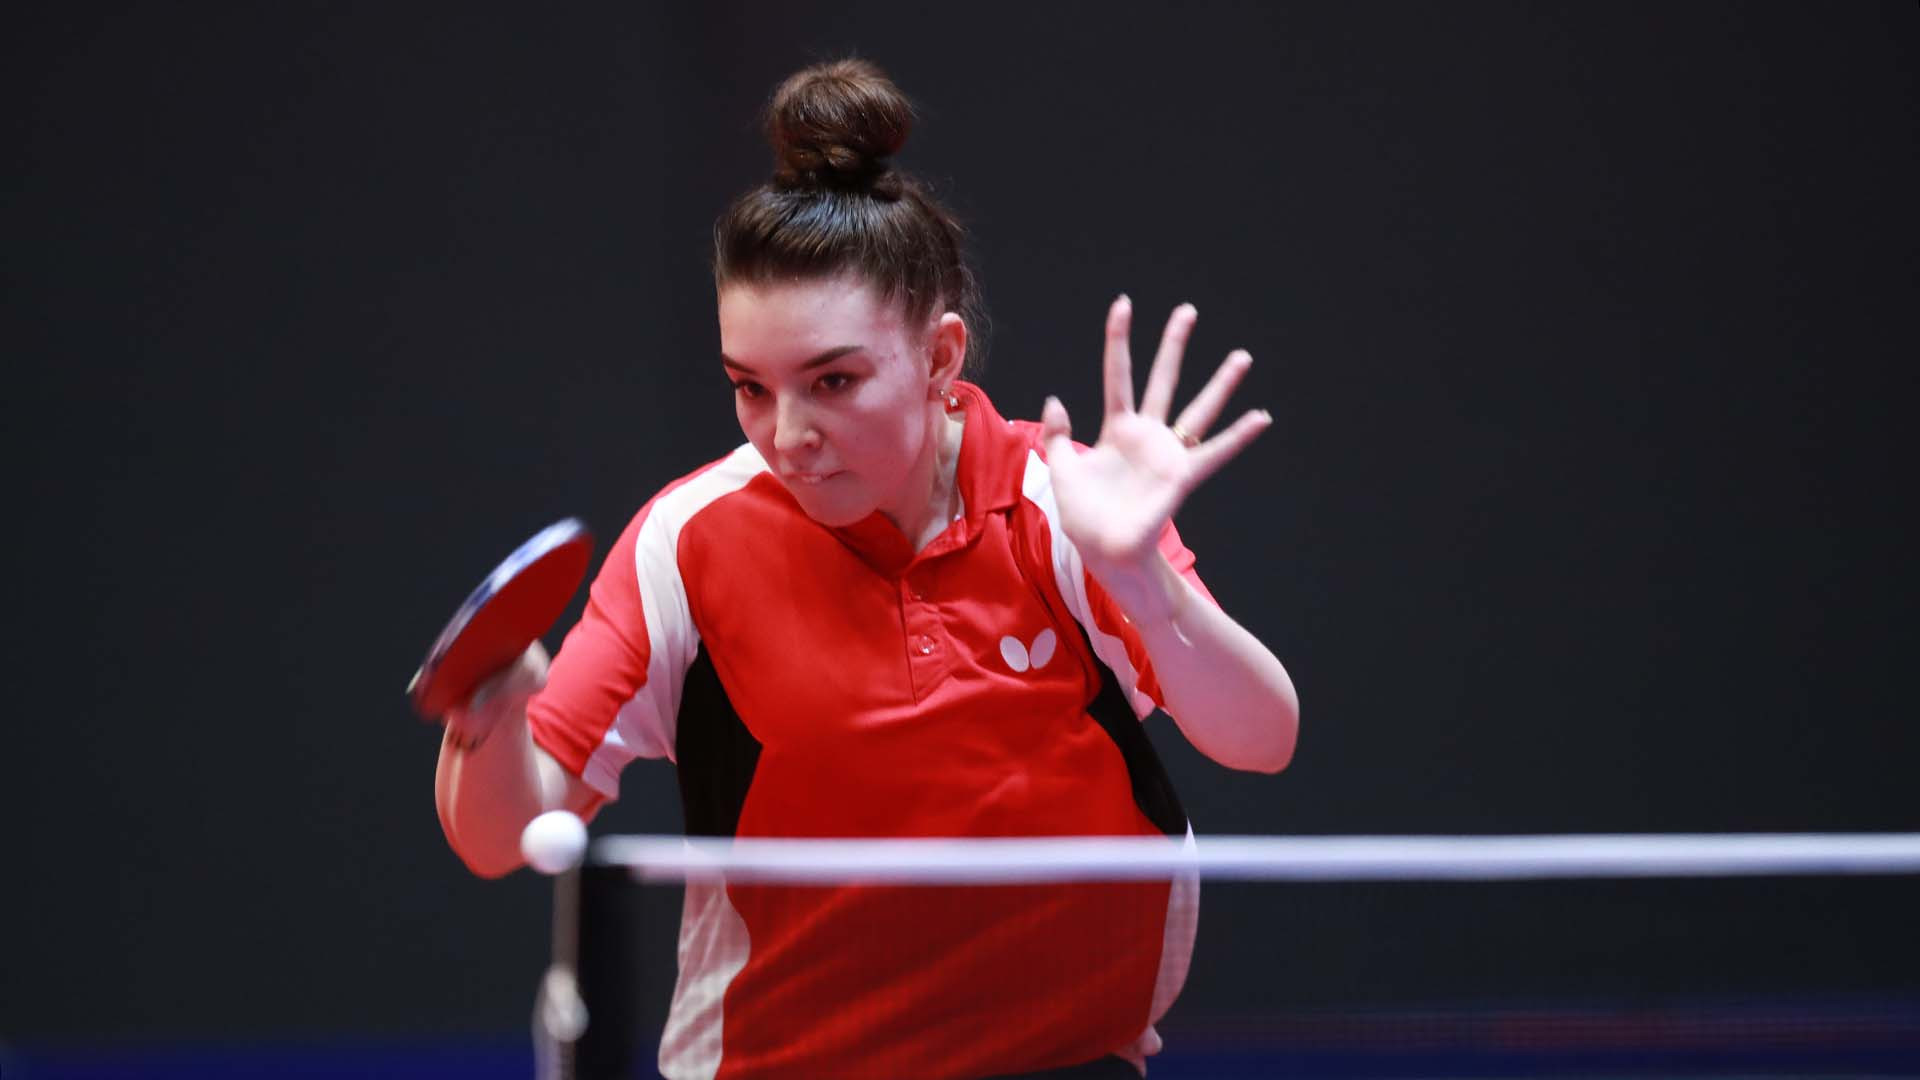 China and Japan through to boys' and girls' team finals at ITTF World Junior Table Tennis Championships